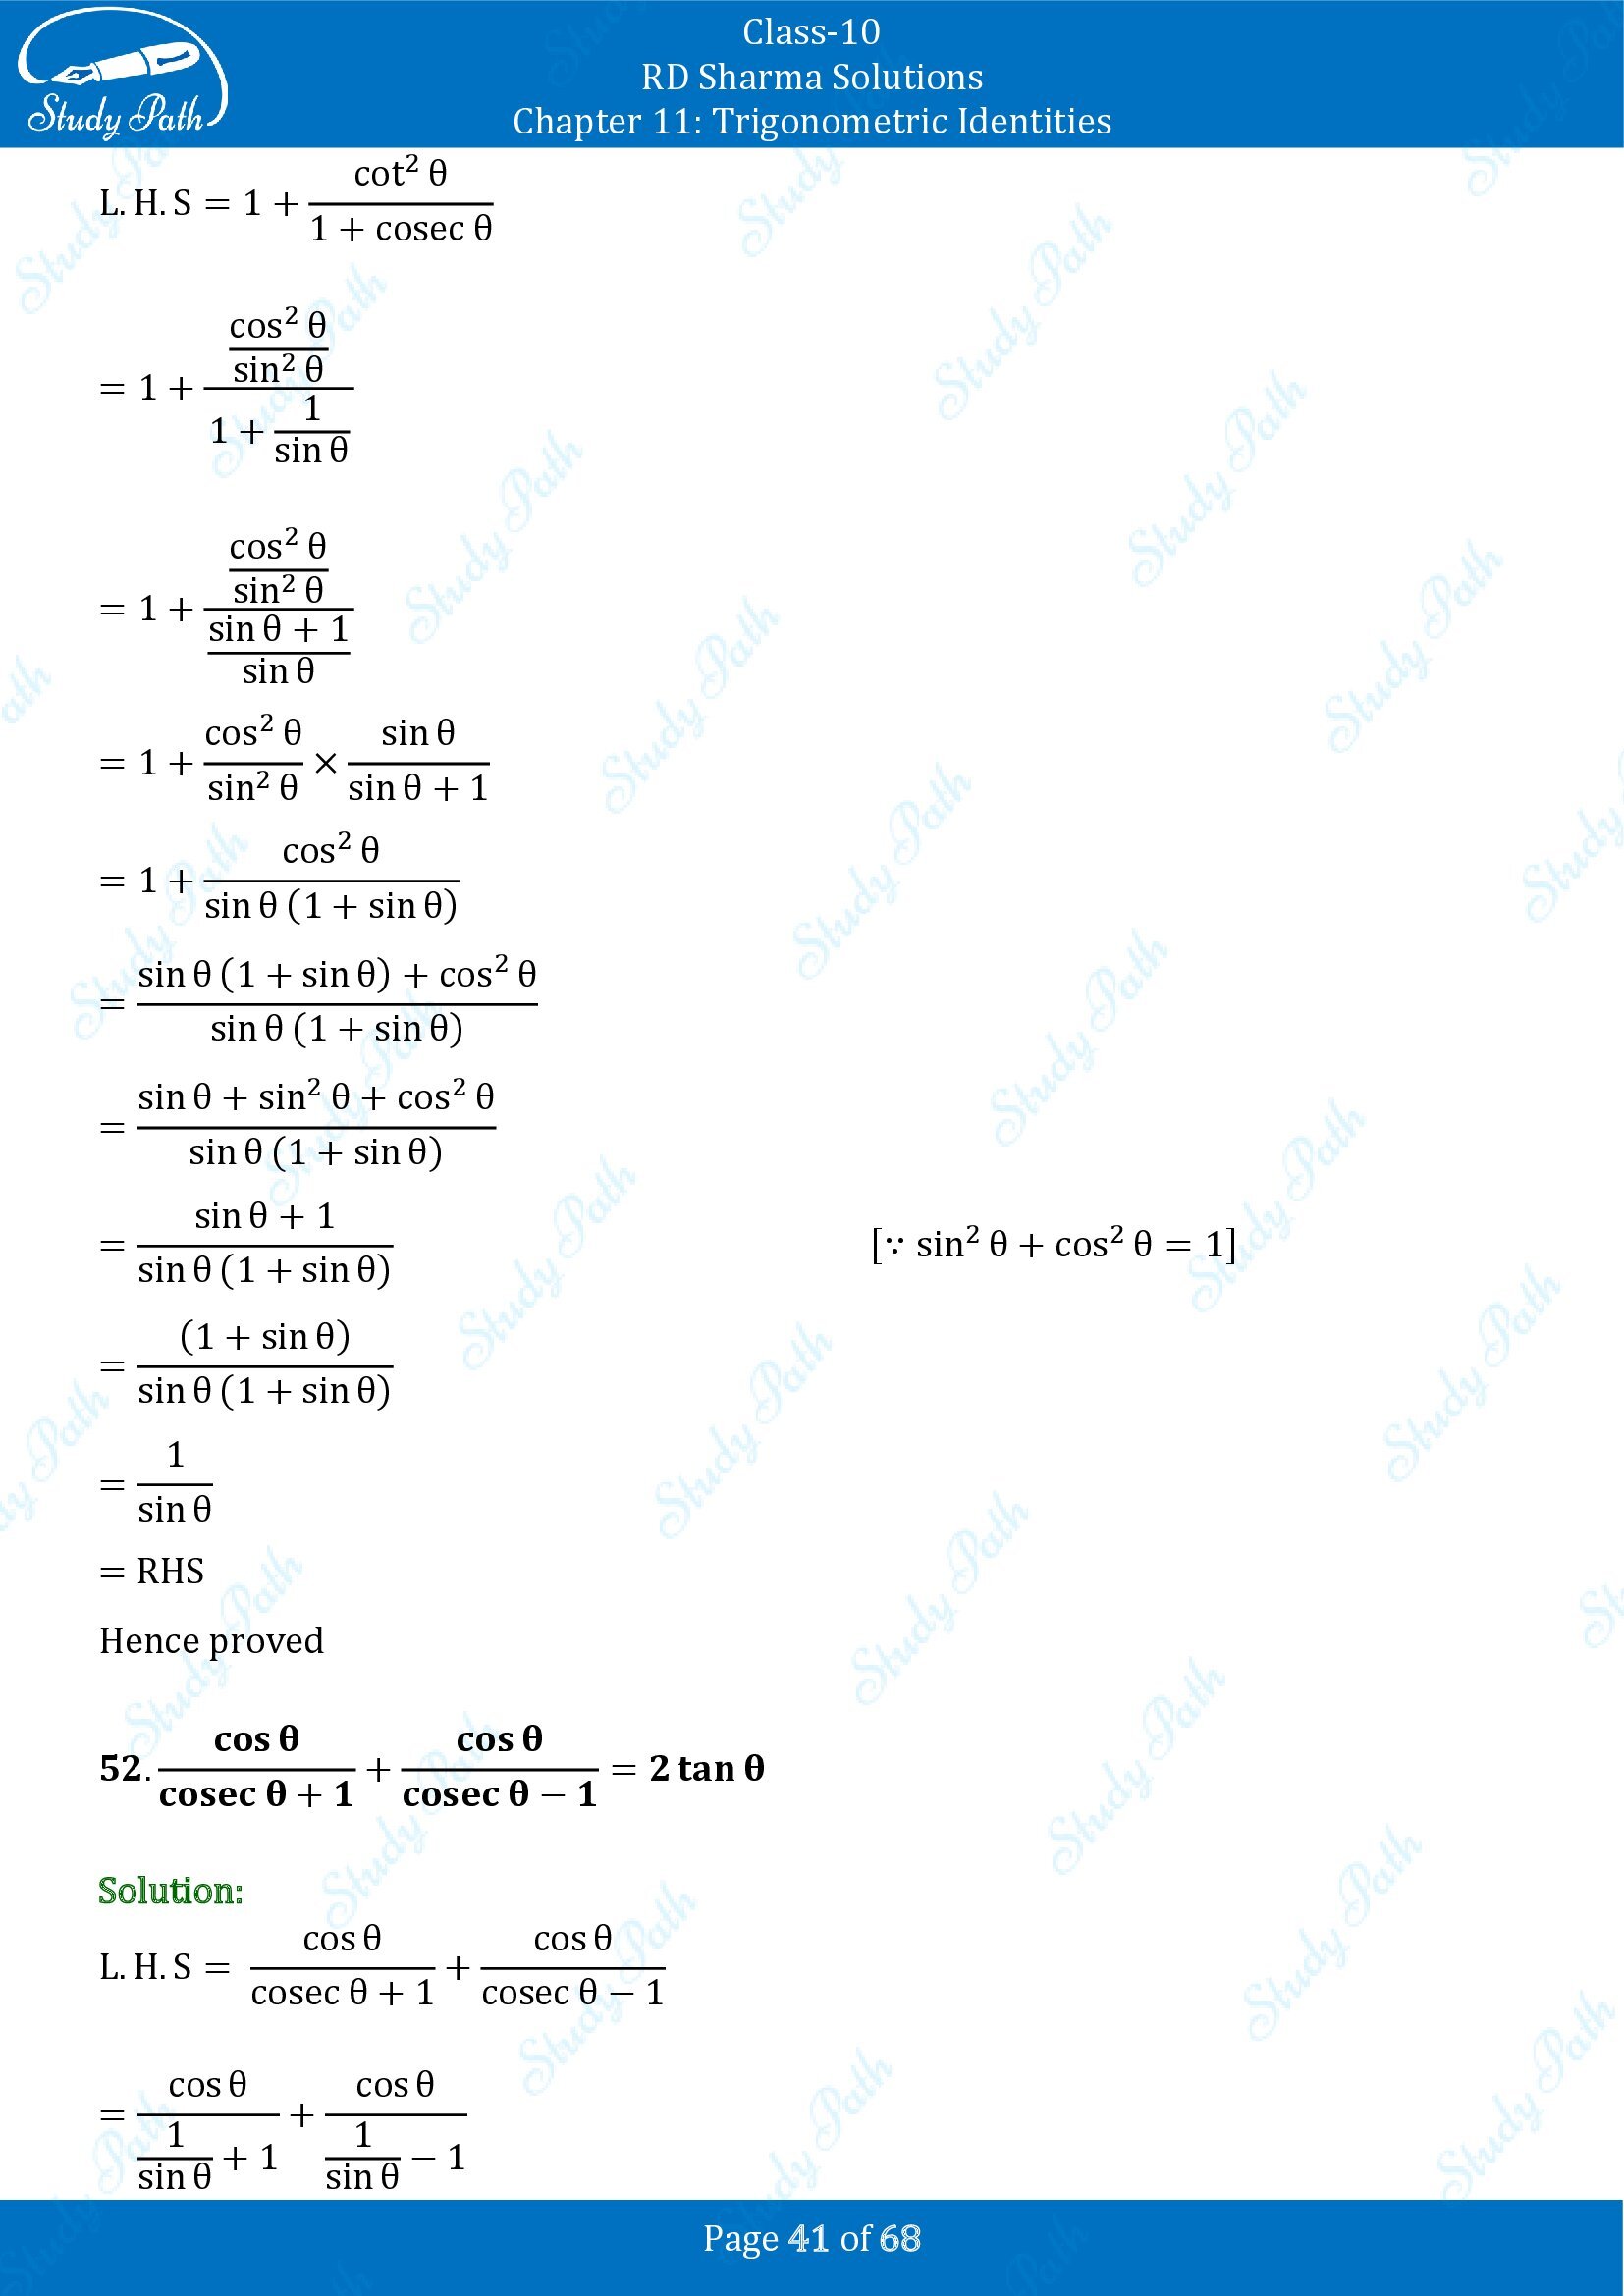 RD Sharma Solutions Class 10 Chapter 11 Trigonometric Identities Exercise 11.1 00041